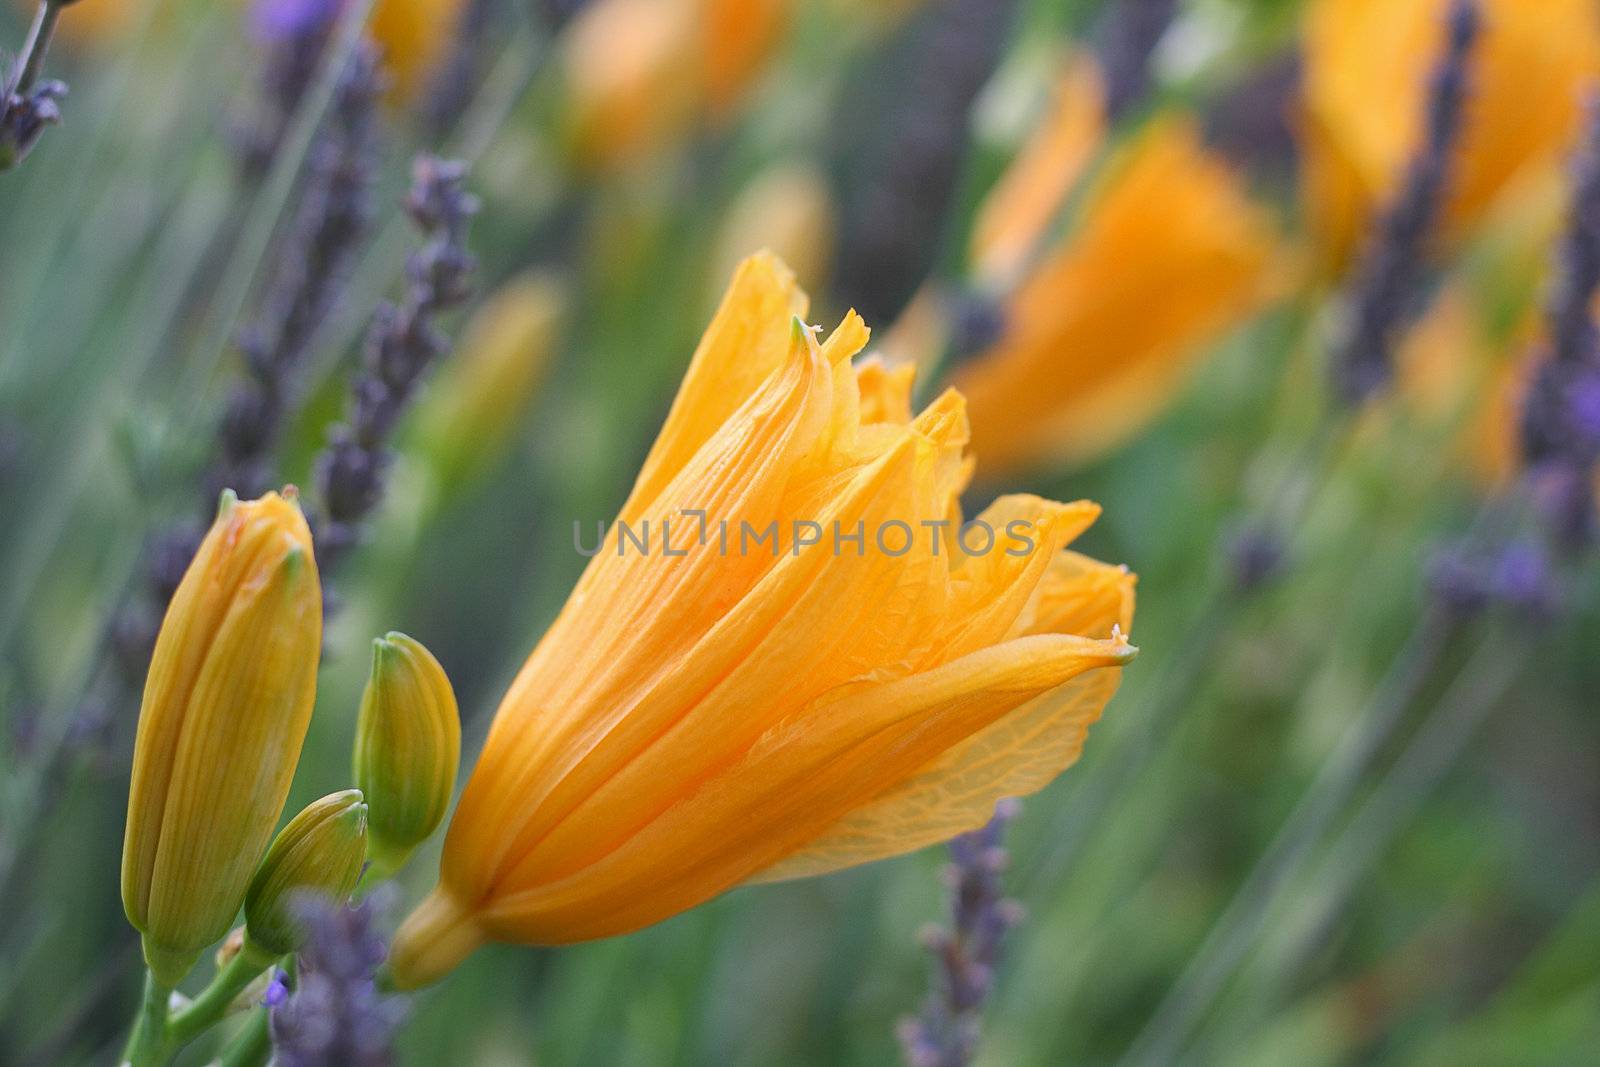 A shallow depth-of-field close up of an orange day lilly blossom with other orange day lilies and lavendar flowers in the background.